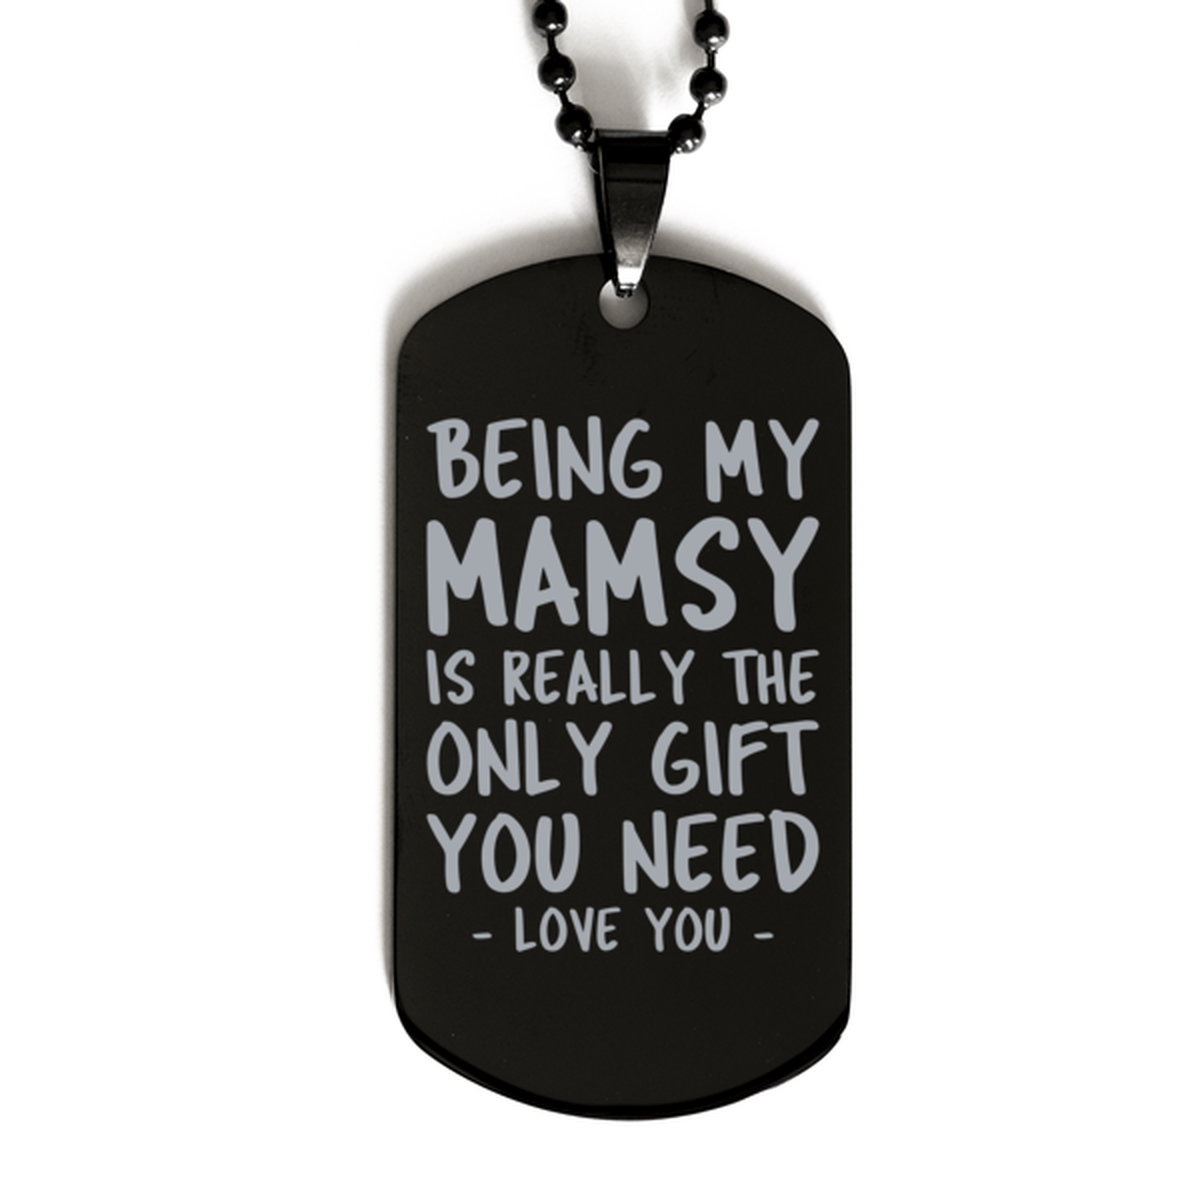 Funny Mamsy Black Dog Tag Necklace, Being My Mamsy Is Really the Only Gift You Need, Best Birthday Gifts for Mamsy